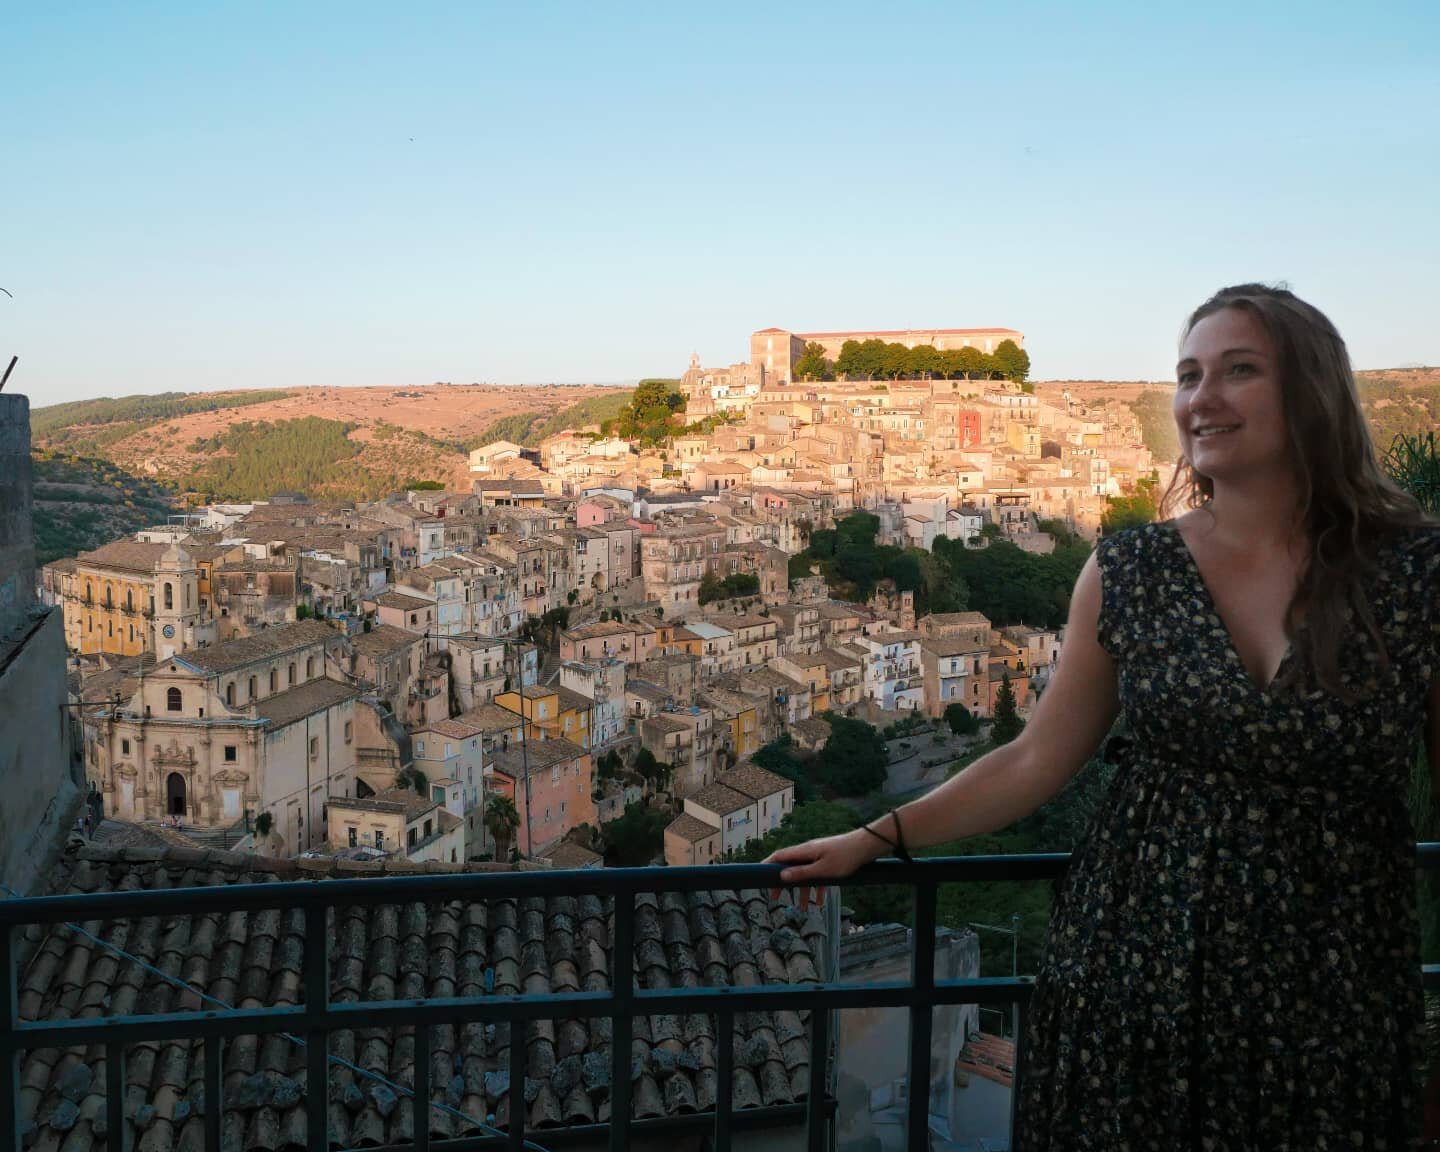 Top hill cities 🇮🇹
. 
🇬🇧 The pretty old Town of Ragusa which stand proudly on the top of the hill 😍 another baroque treasure which you should not miss! 
. 
.
.
🇨🇵 La jolie Vieille Ville de Ragusa, qui trone fi&egrave;rement au sommet d'une col